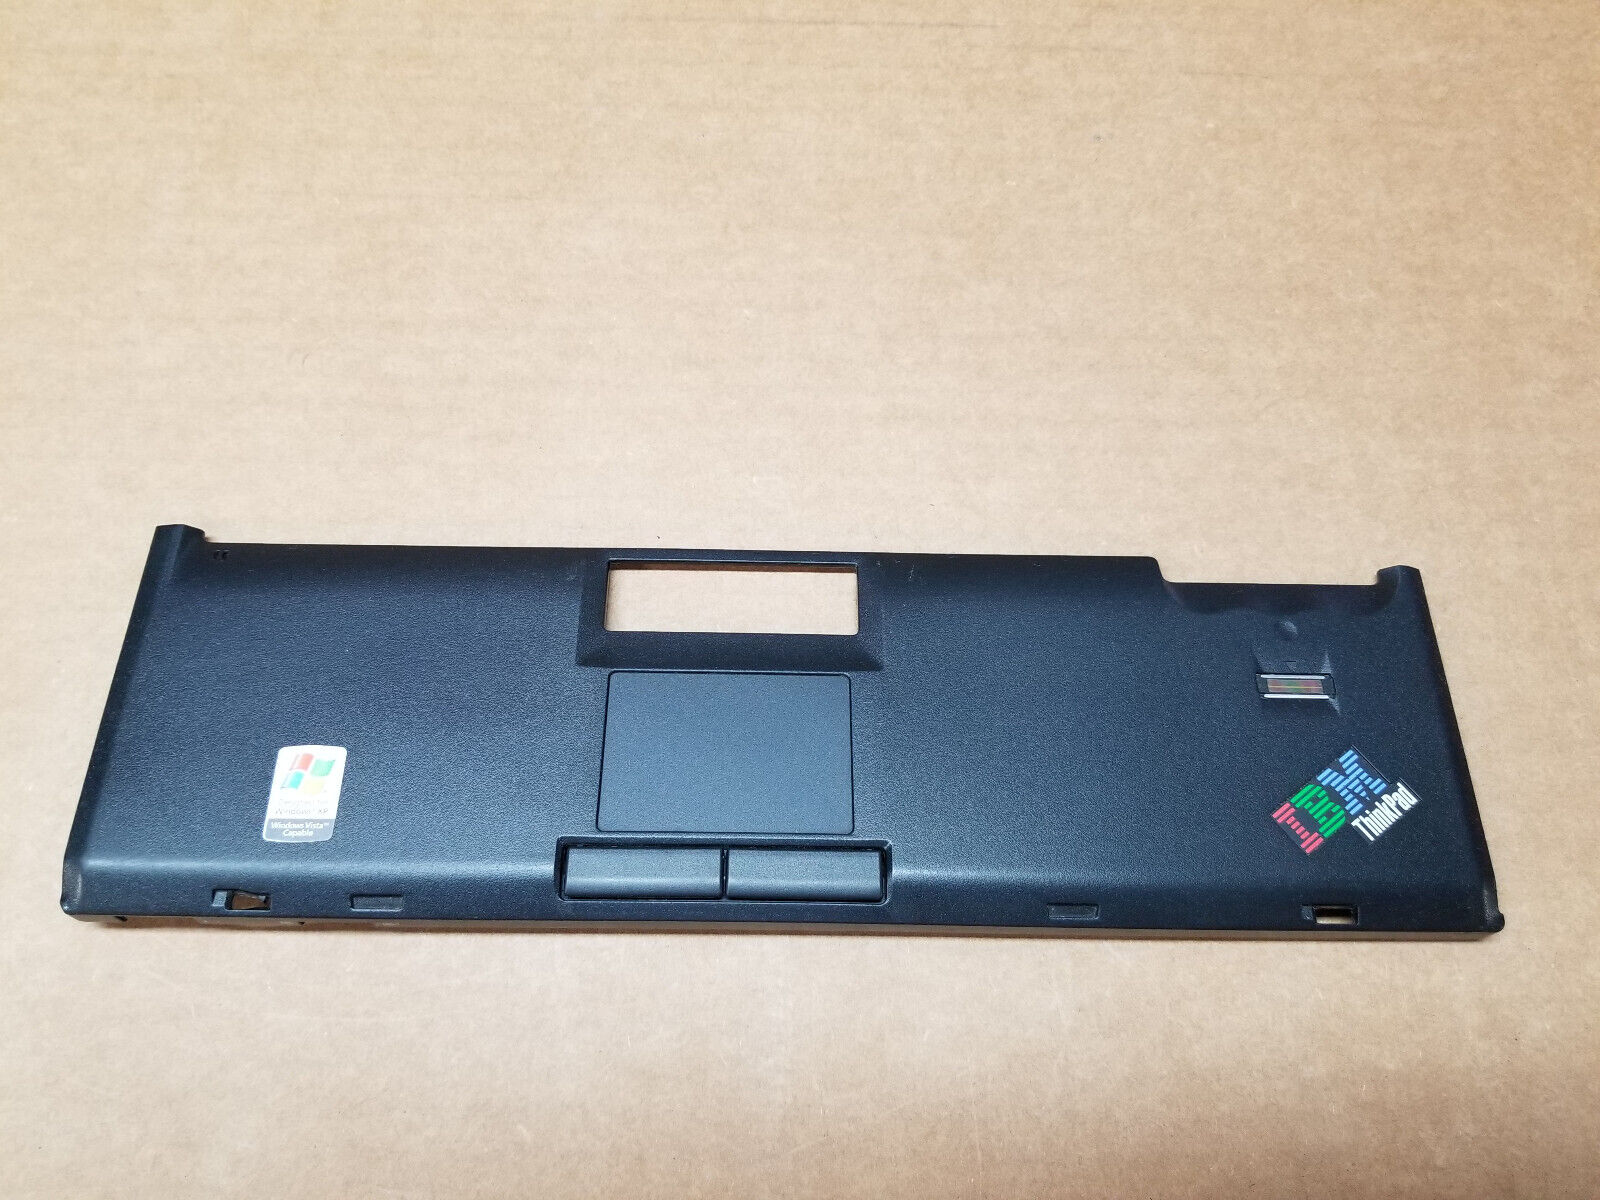 IBM Lenovo T60 Palmrest 26R9377 w/ 39T7208 Touchpad Glidepoint Assembly & Finger